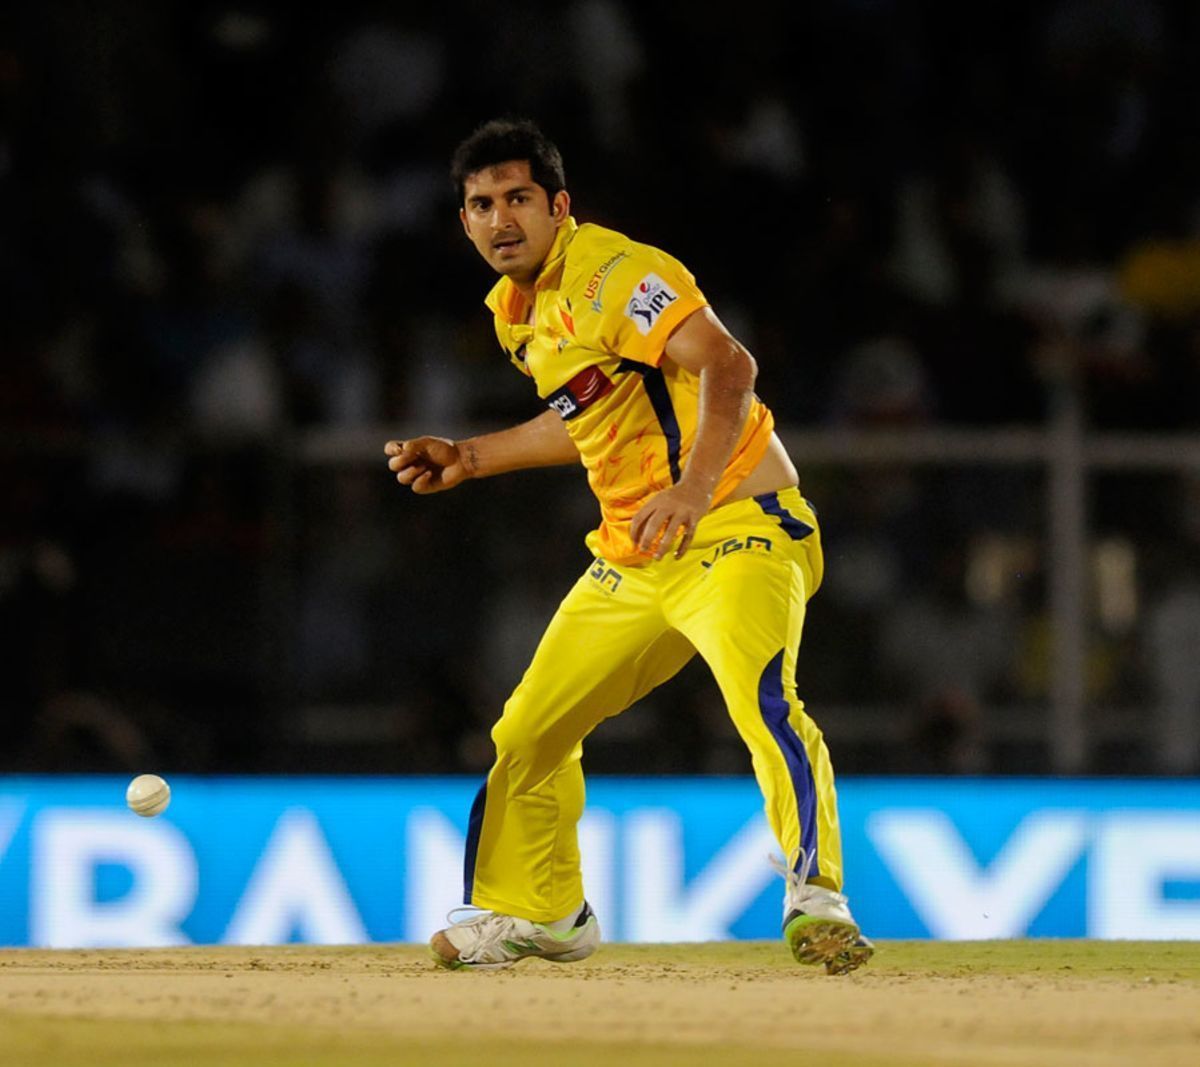 Mohit Sharma made his debut in the IPL with CSK.